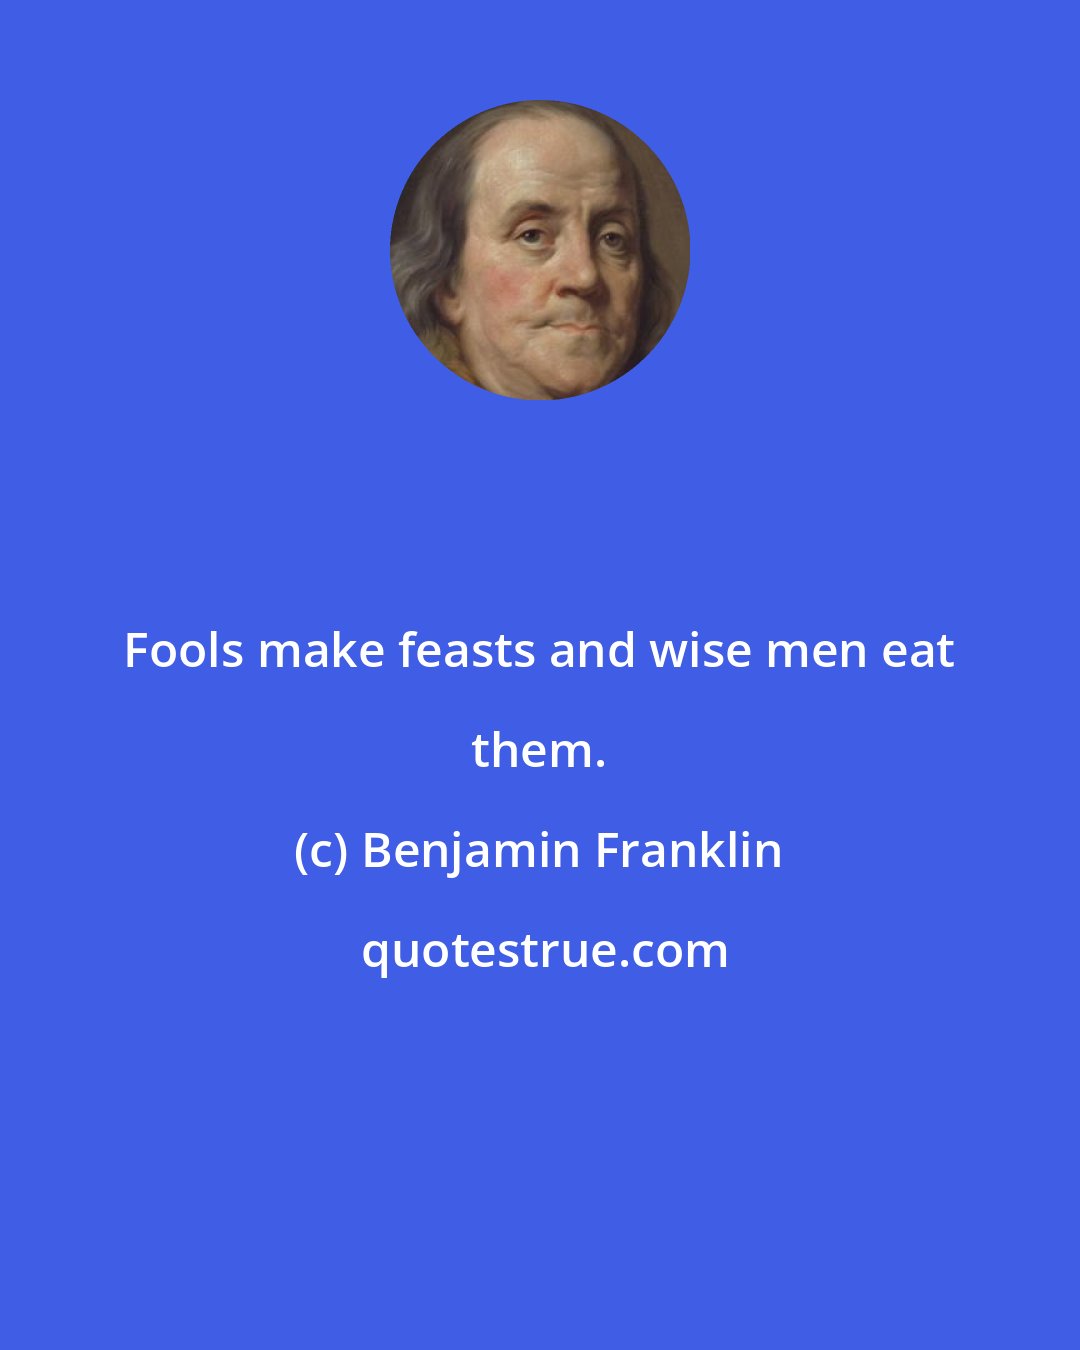 Benjamin Franklin: Fools make feasts and wise men eat them.